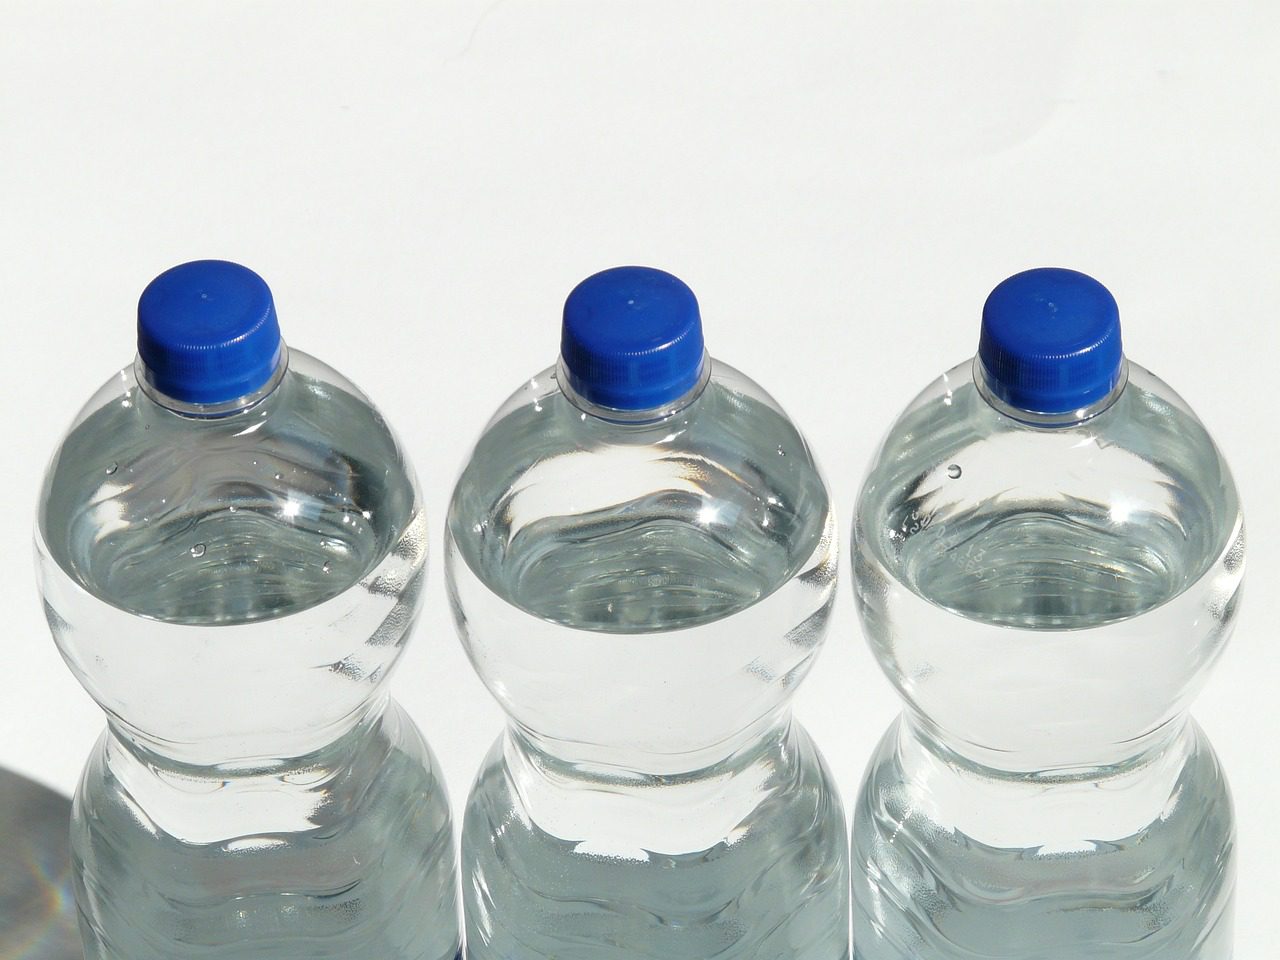 plastic bottles made from acetal sheets